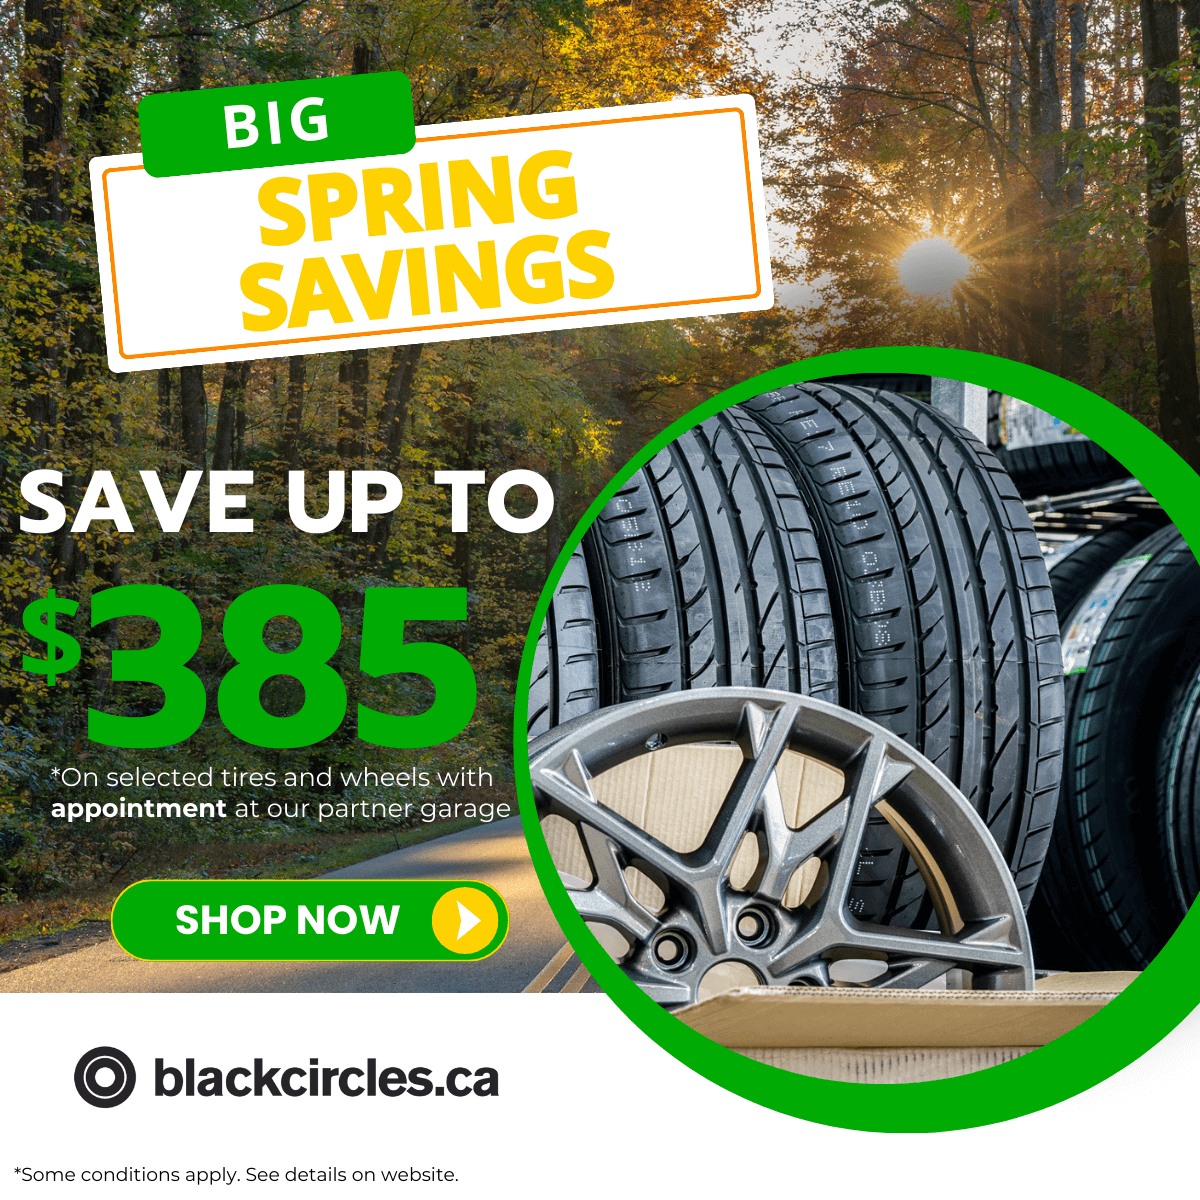 Save up to $385 on tires and wheels at blackcircles.ca